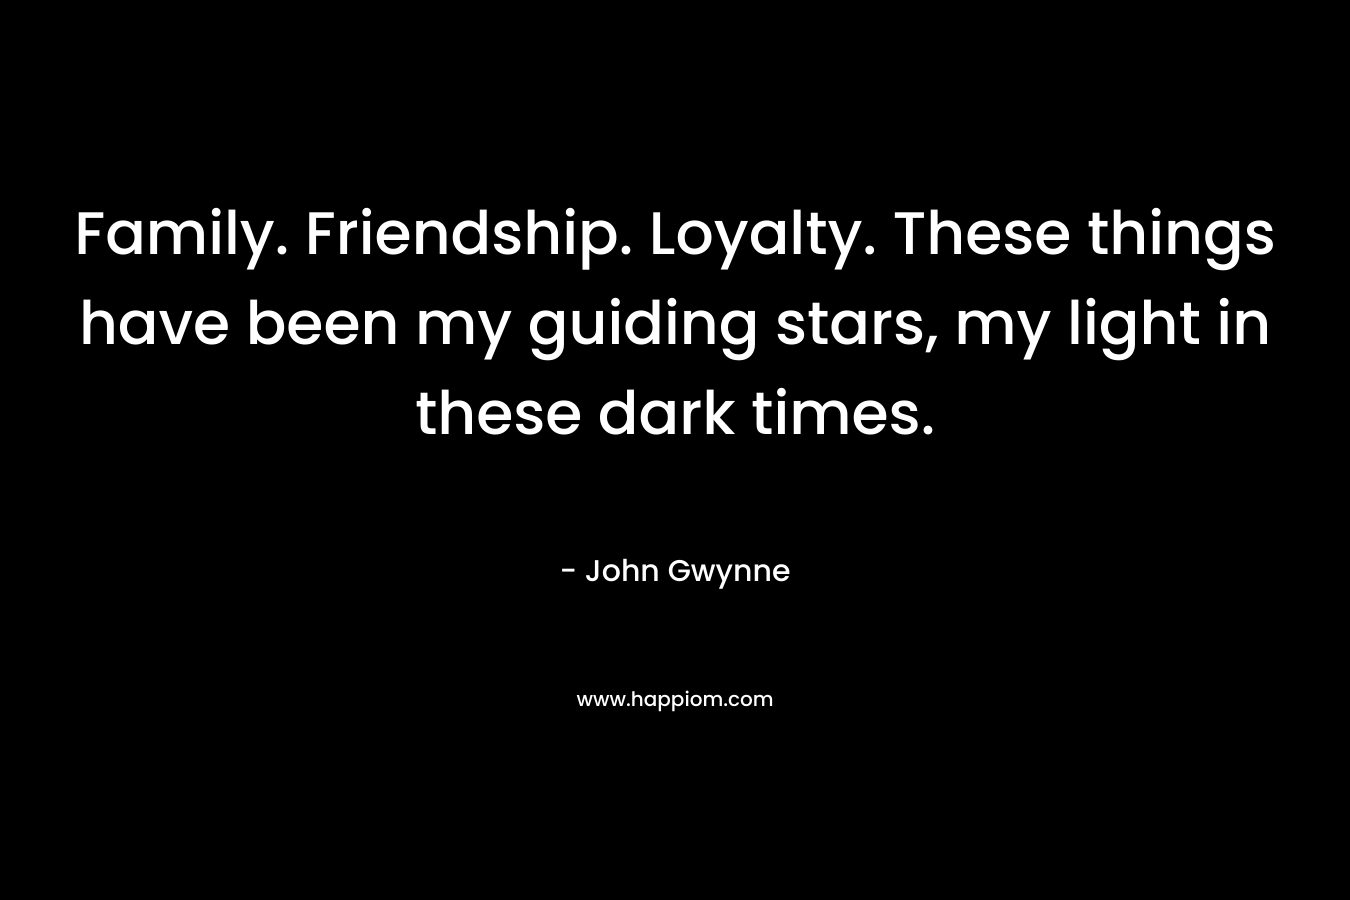 Family. Friendship. Loyalty. These things have been my guiding stars, my light in these dark times.